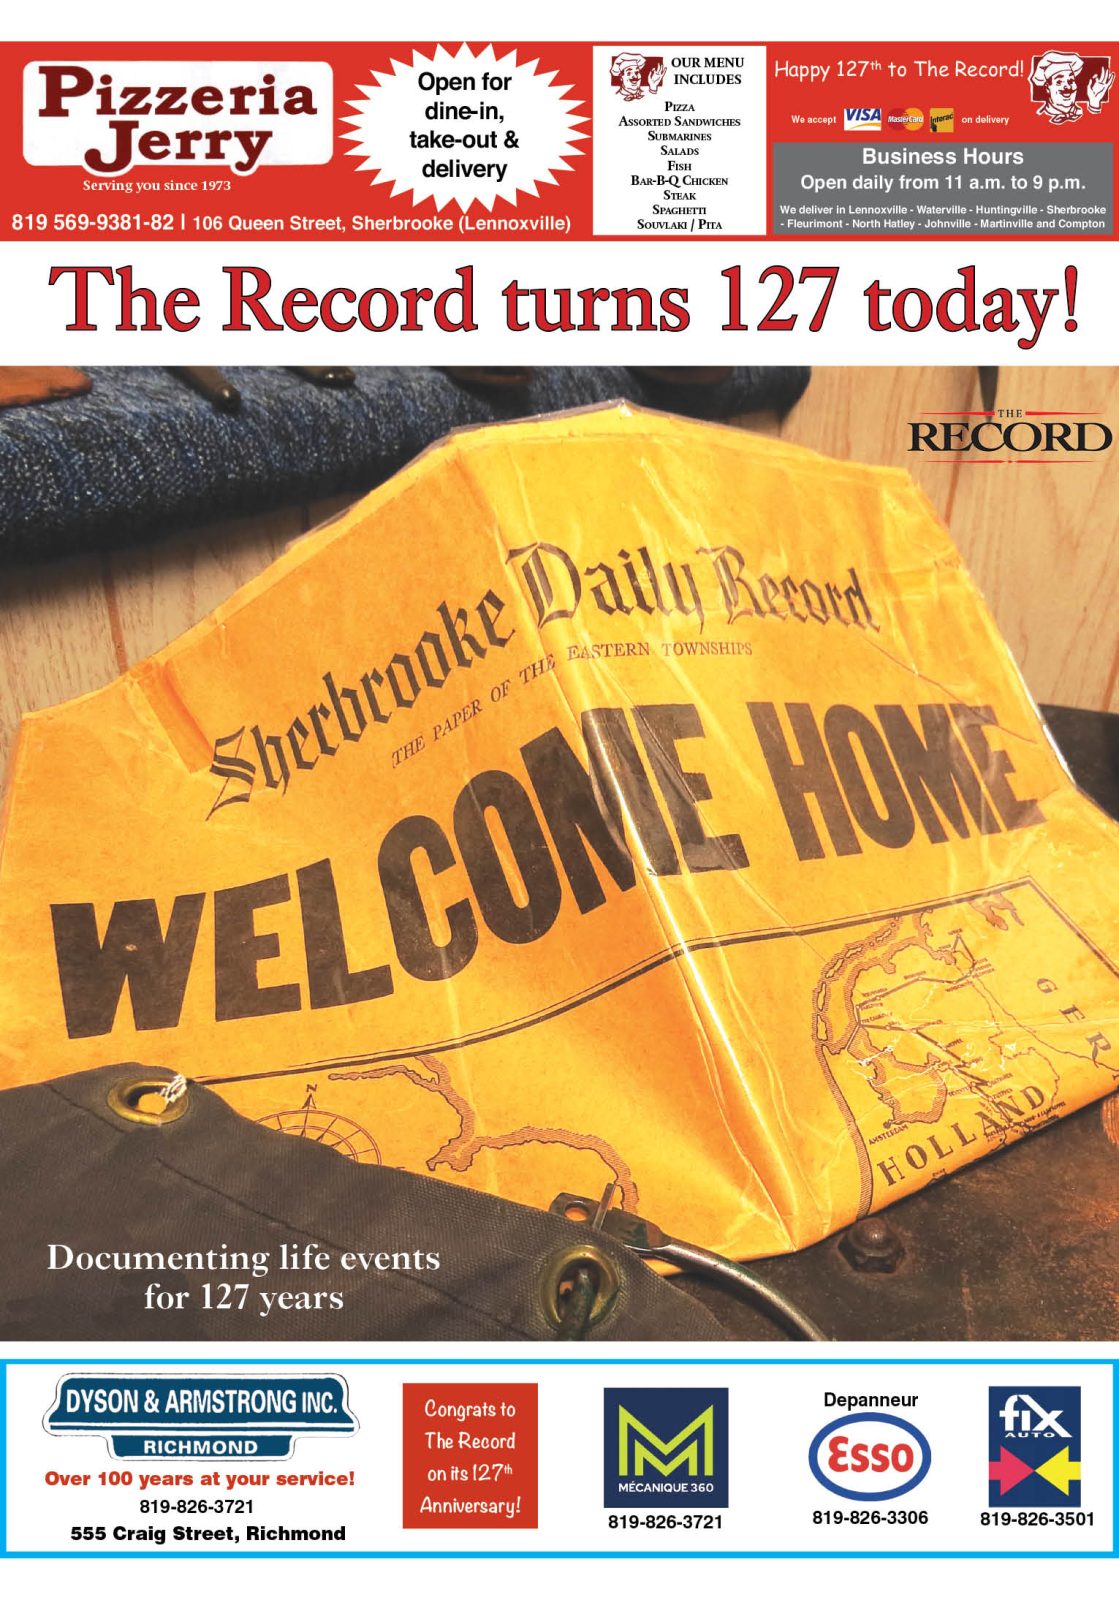 The Record turns 127 today!